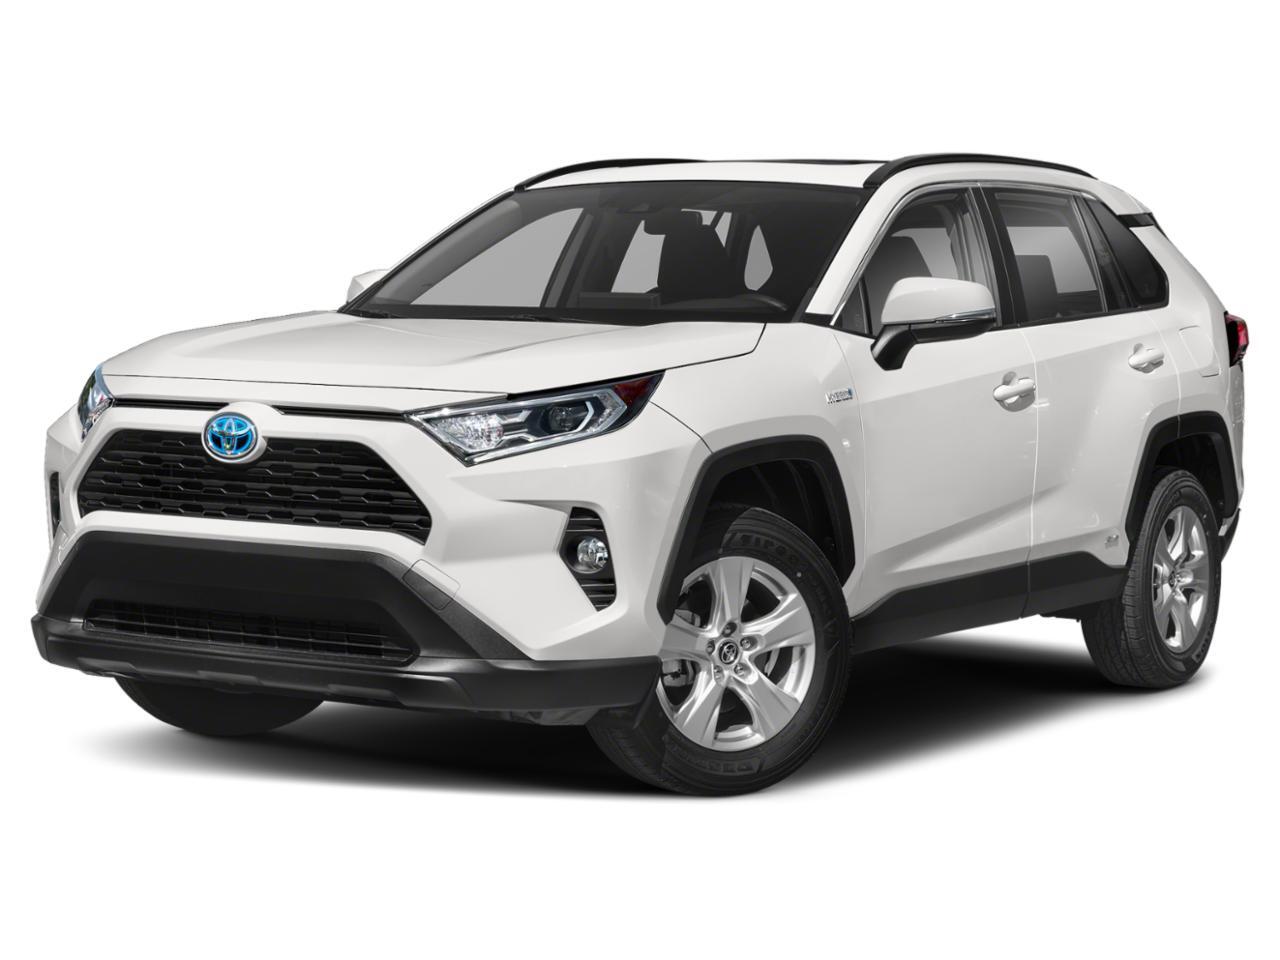 2019 Toyota RAV4 Hybrid LE- HEATED SEATS| 1 OWNER| NO ACCIDENTS 